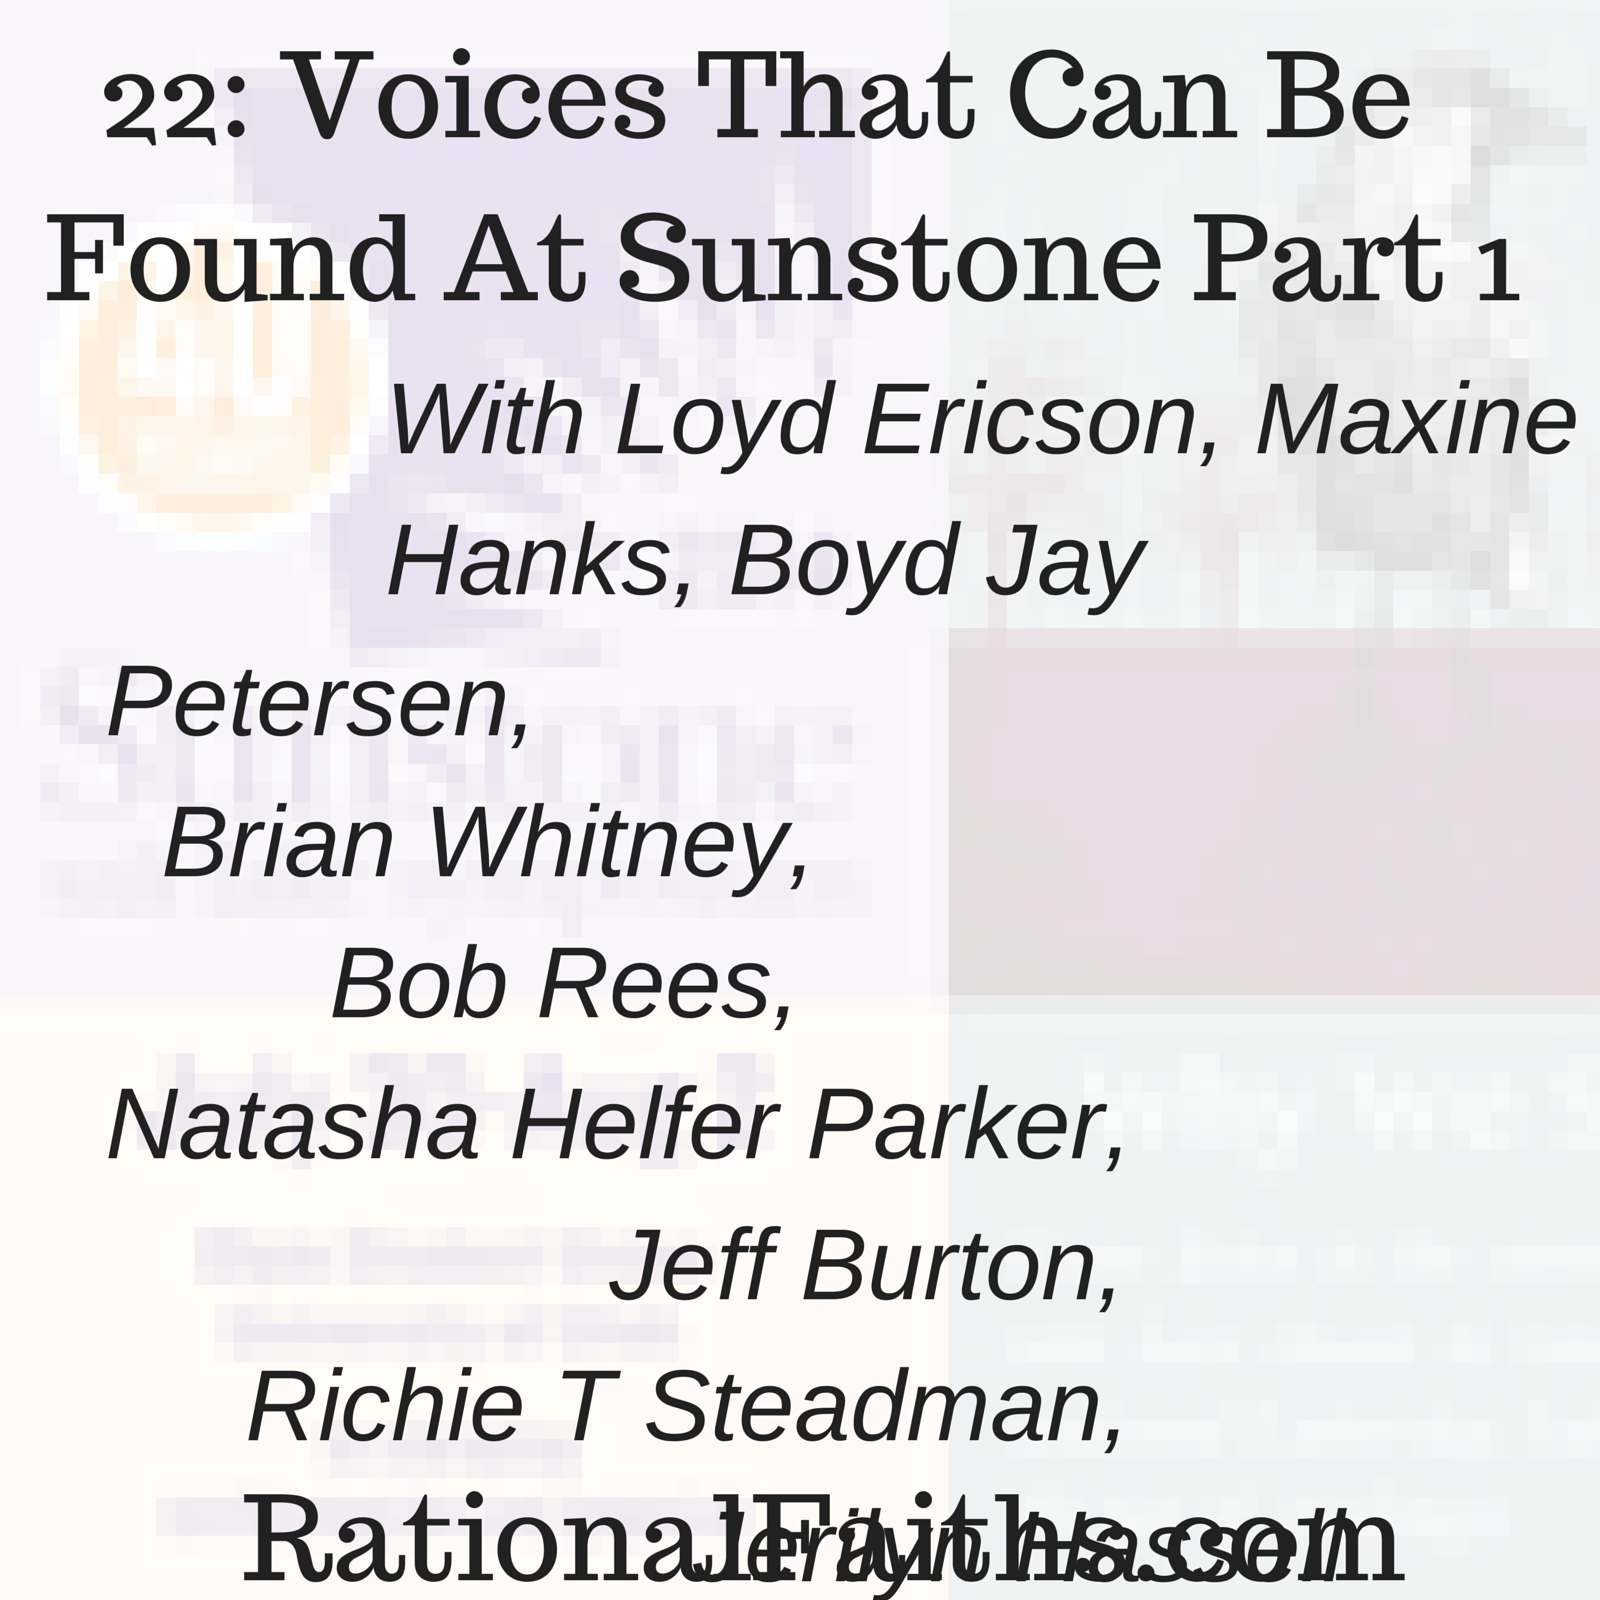 22- Voices That Can Be Found At Sunstone